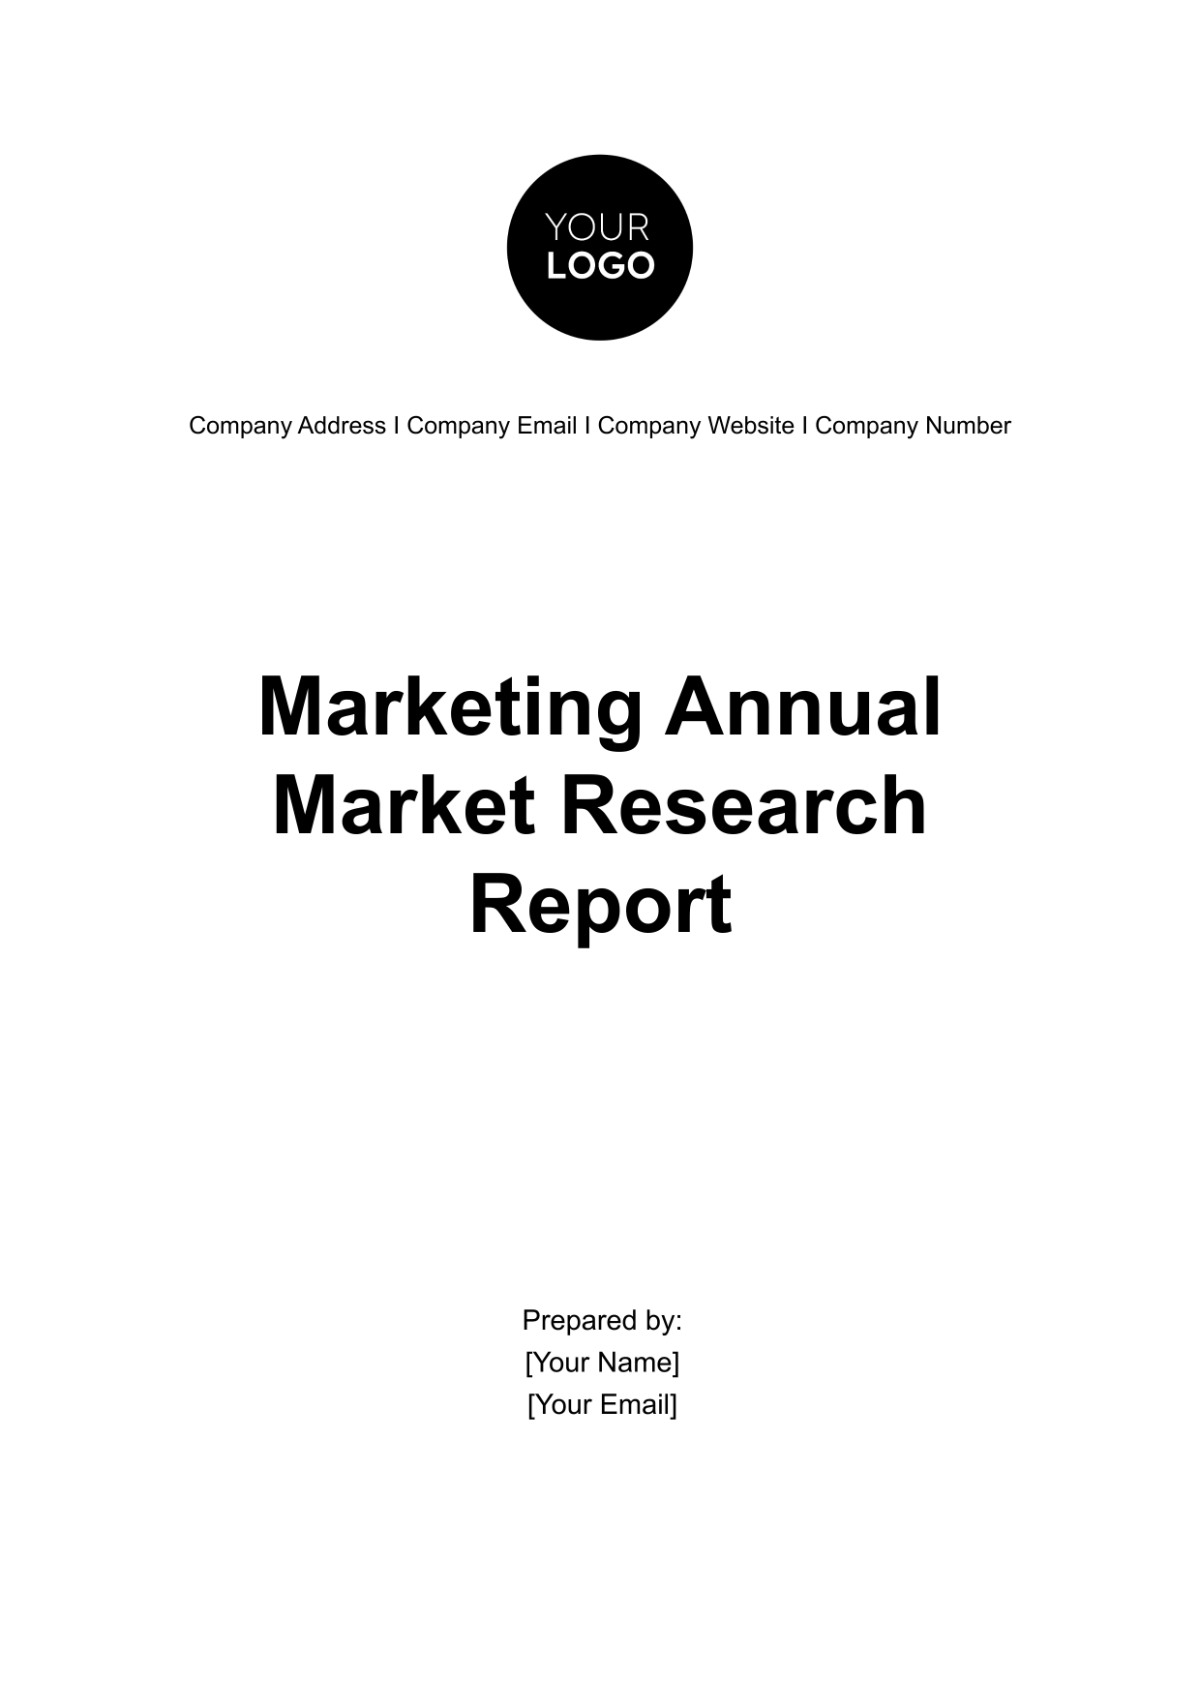 Free Marketing Annual Market Research Report Template